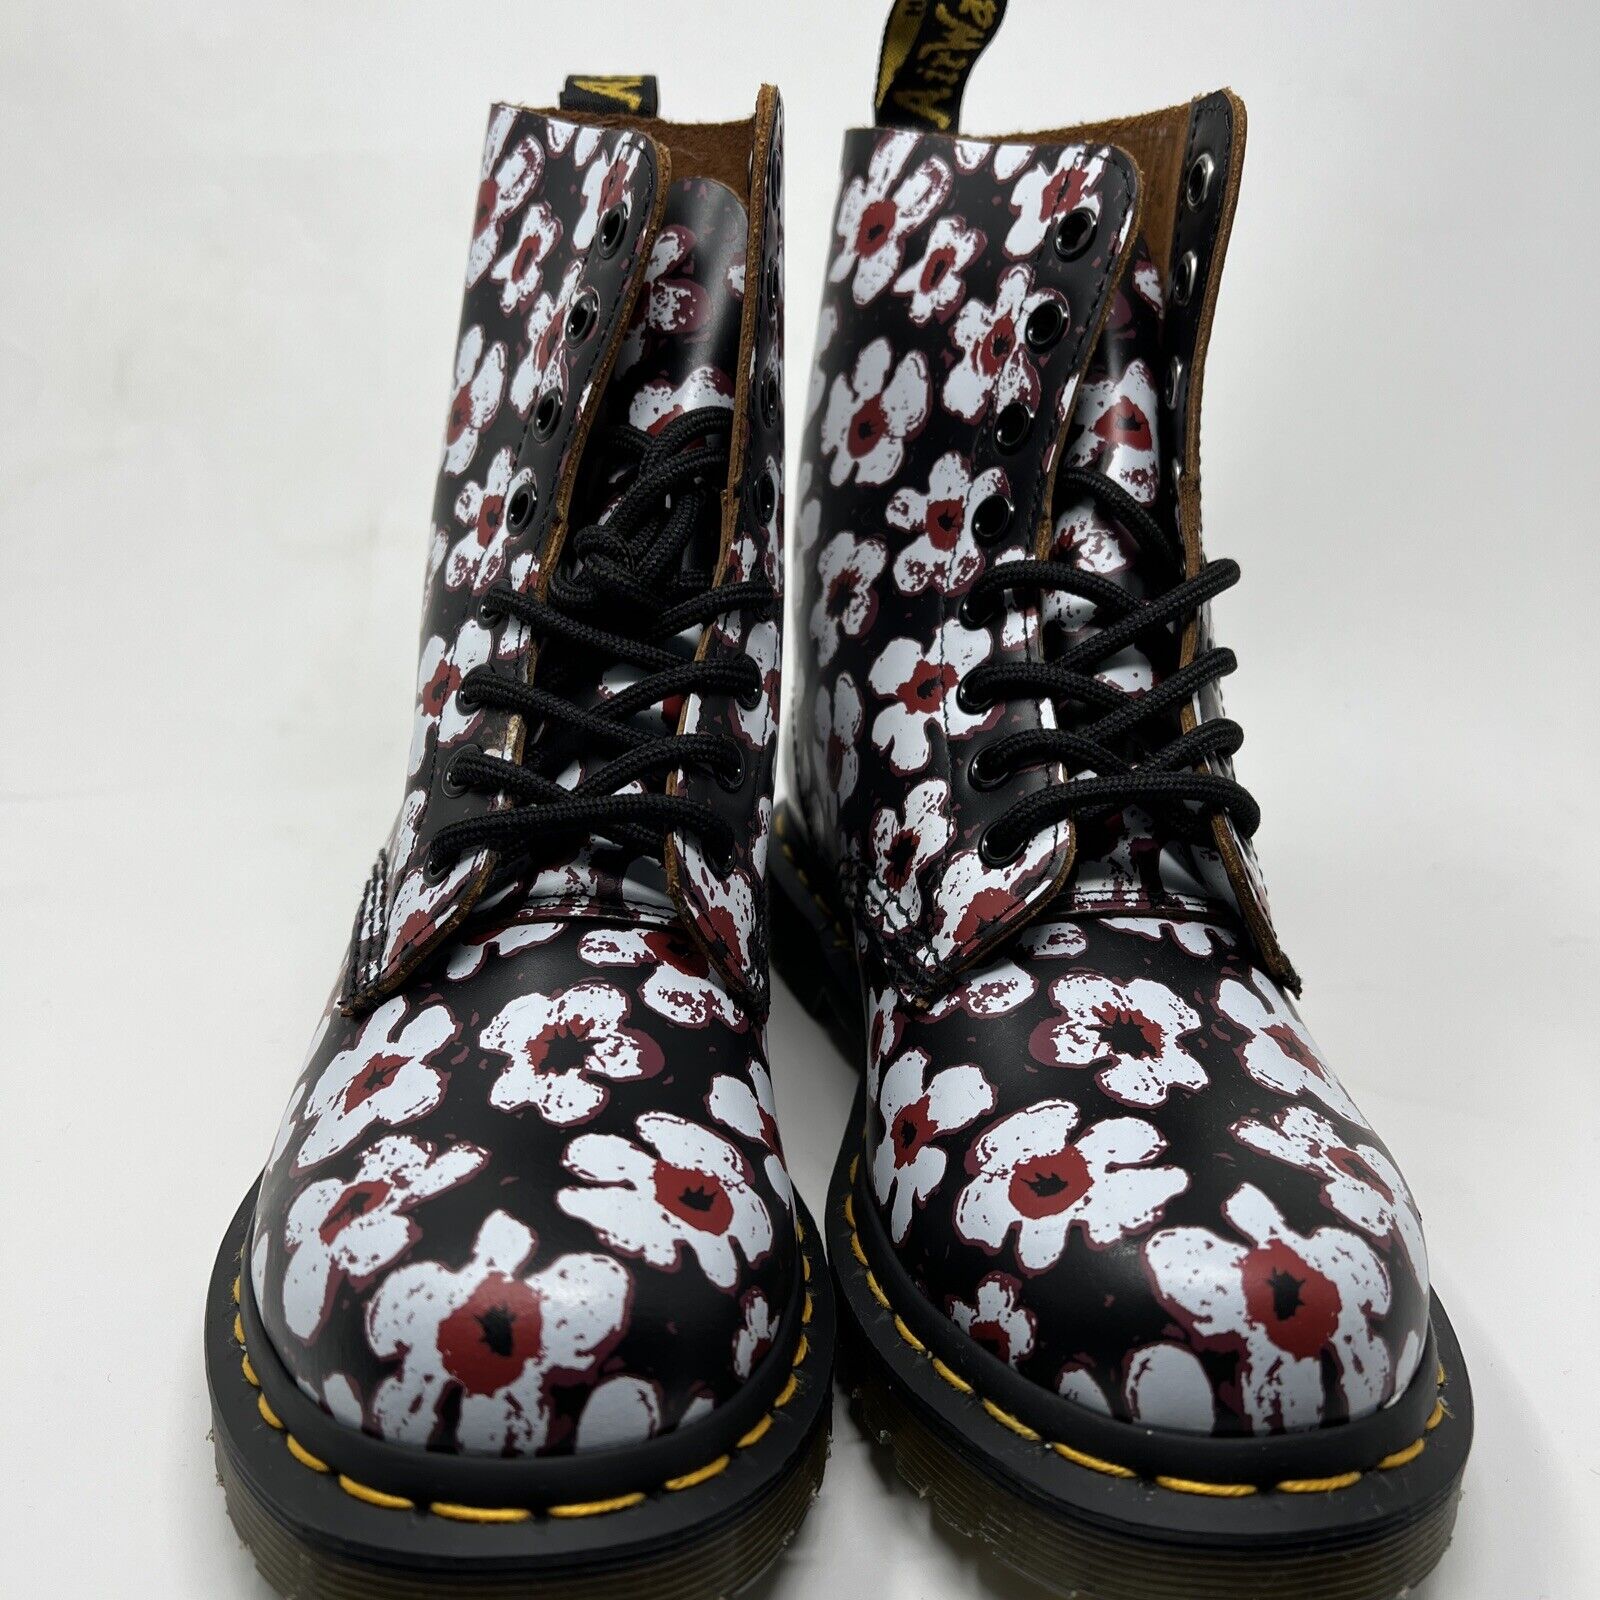 Doc Martens 1460 Pascal with Soles US Women's size 5 | eBay